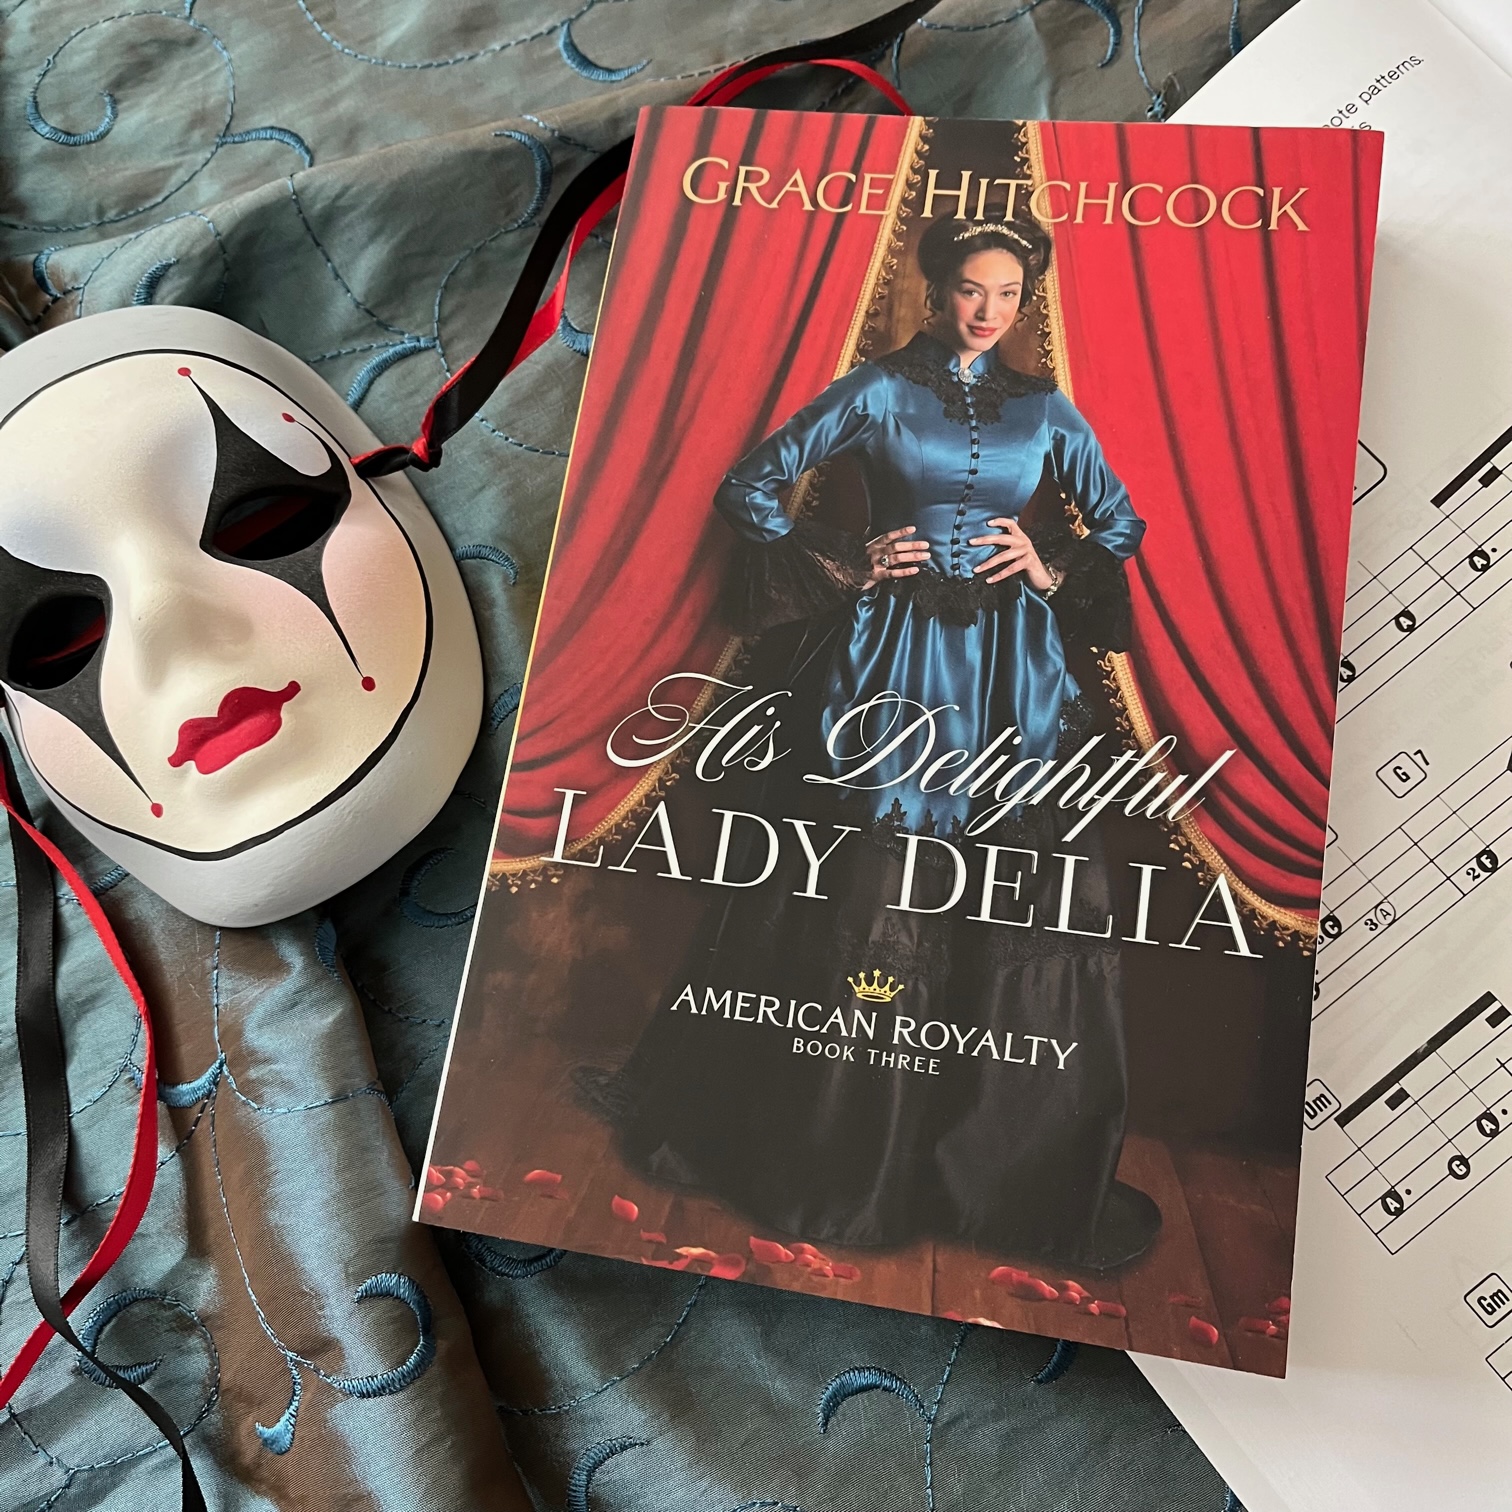 His Delightful Lady Delia by Grace Hitchcock